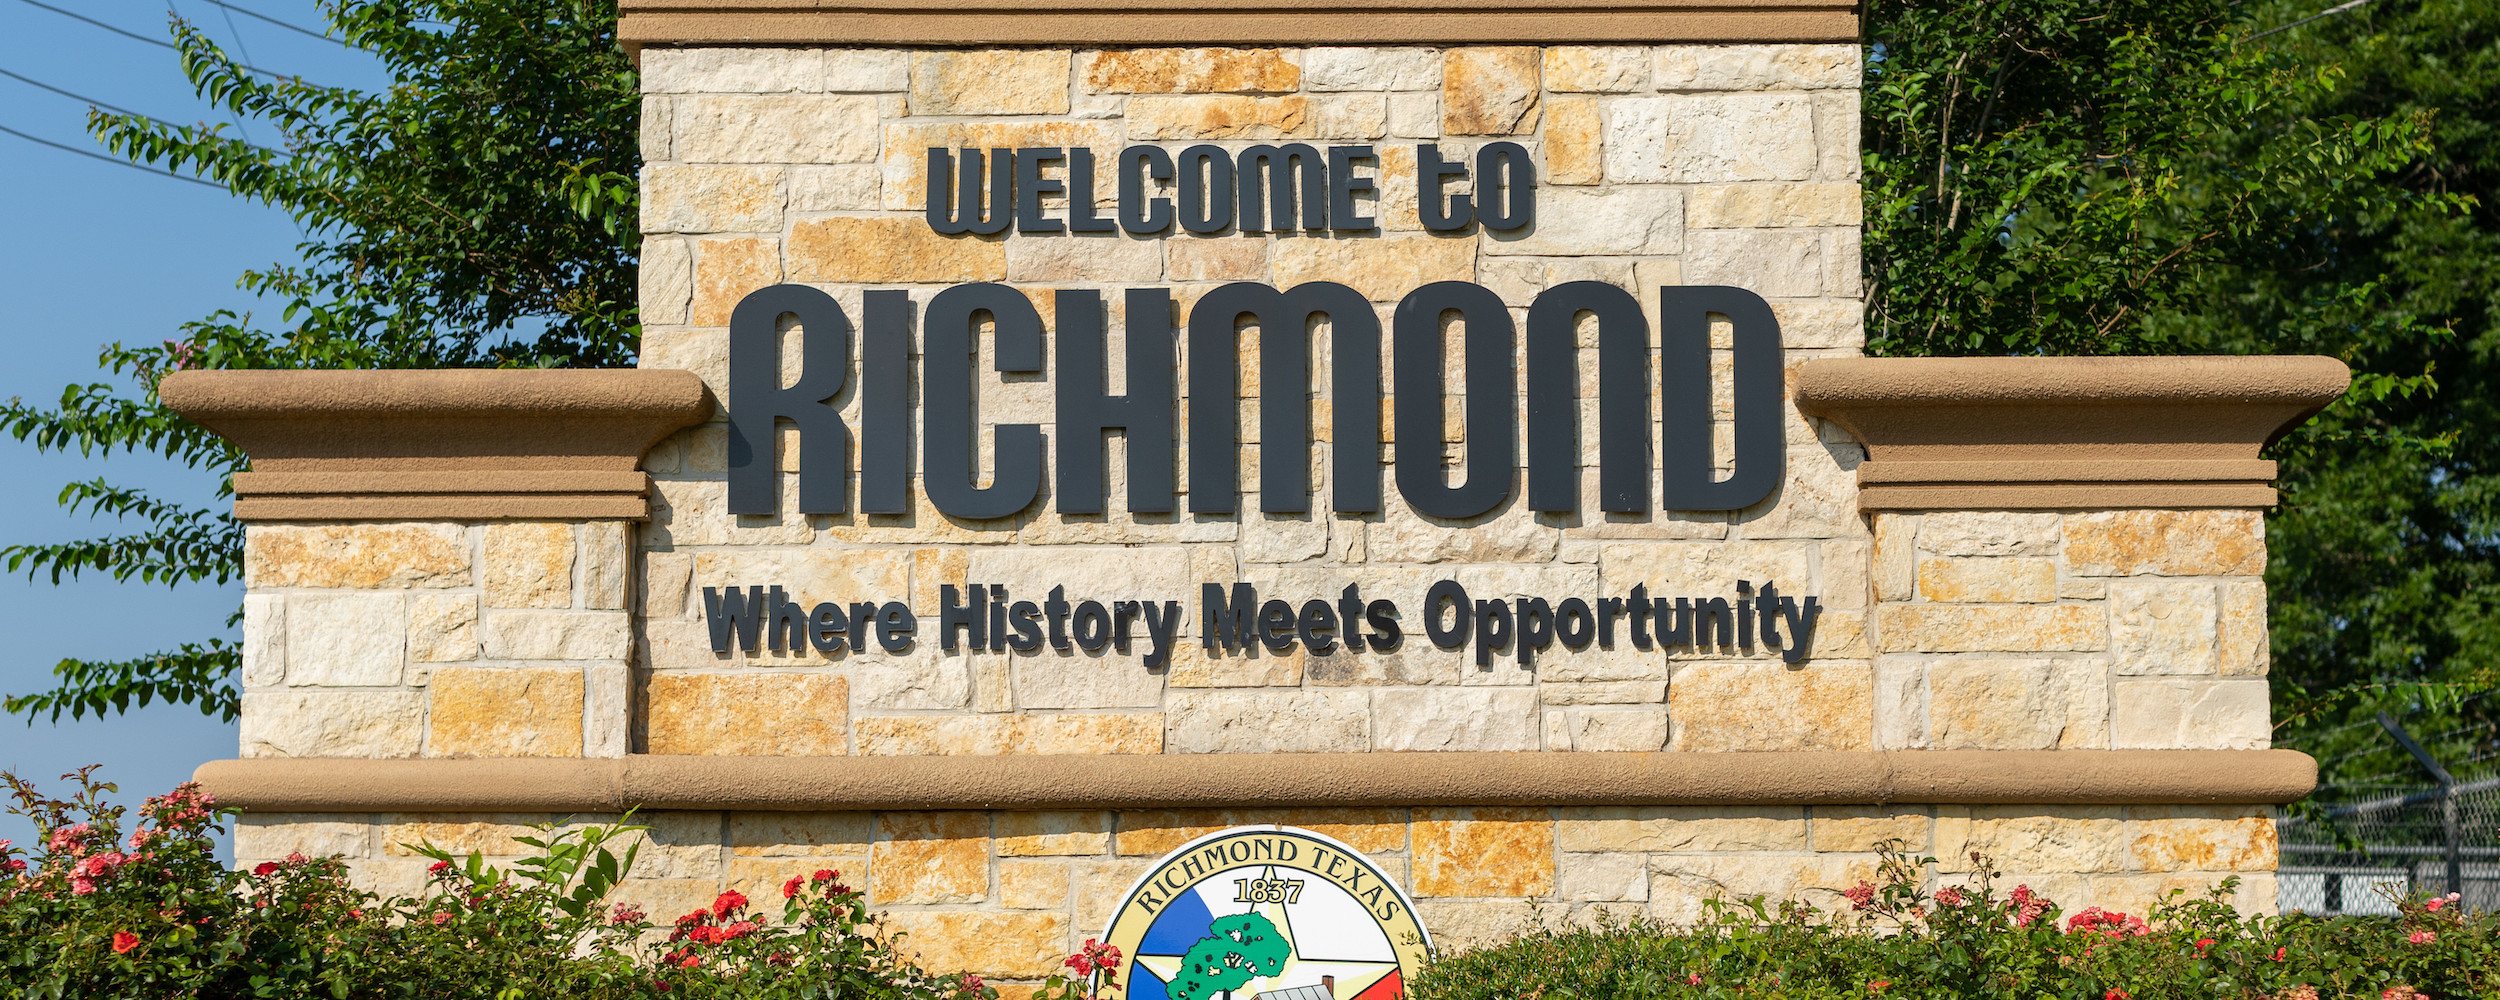 Welcome to Richmond sign with slogan "where history meets opportunity"